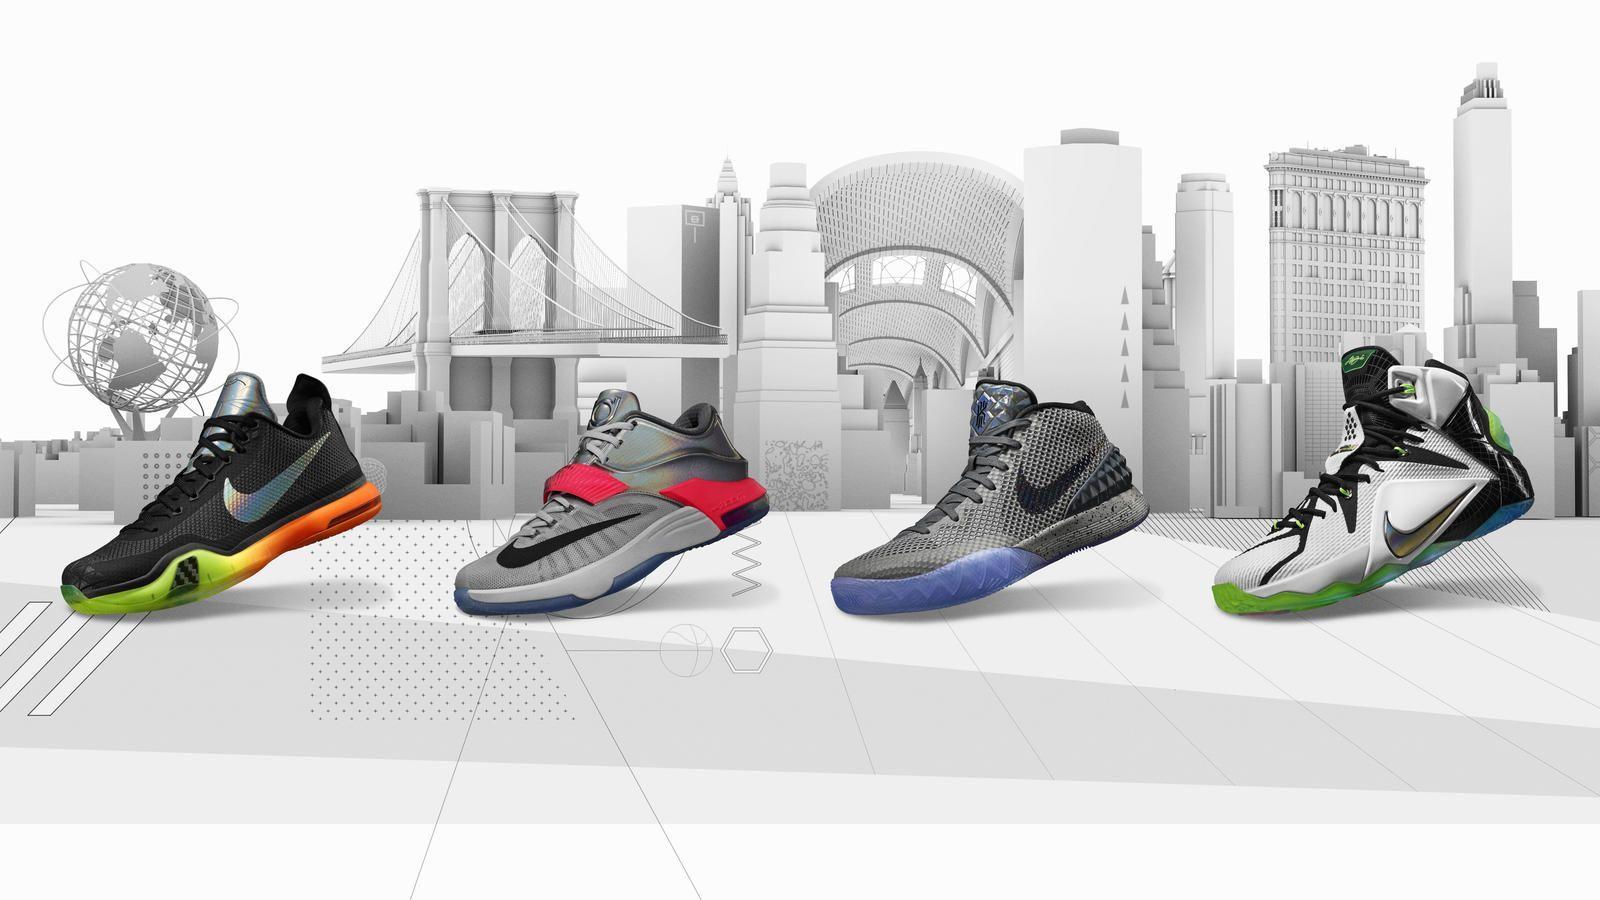 Nike Basketball 2015 All Star Collection Unveiled